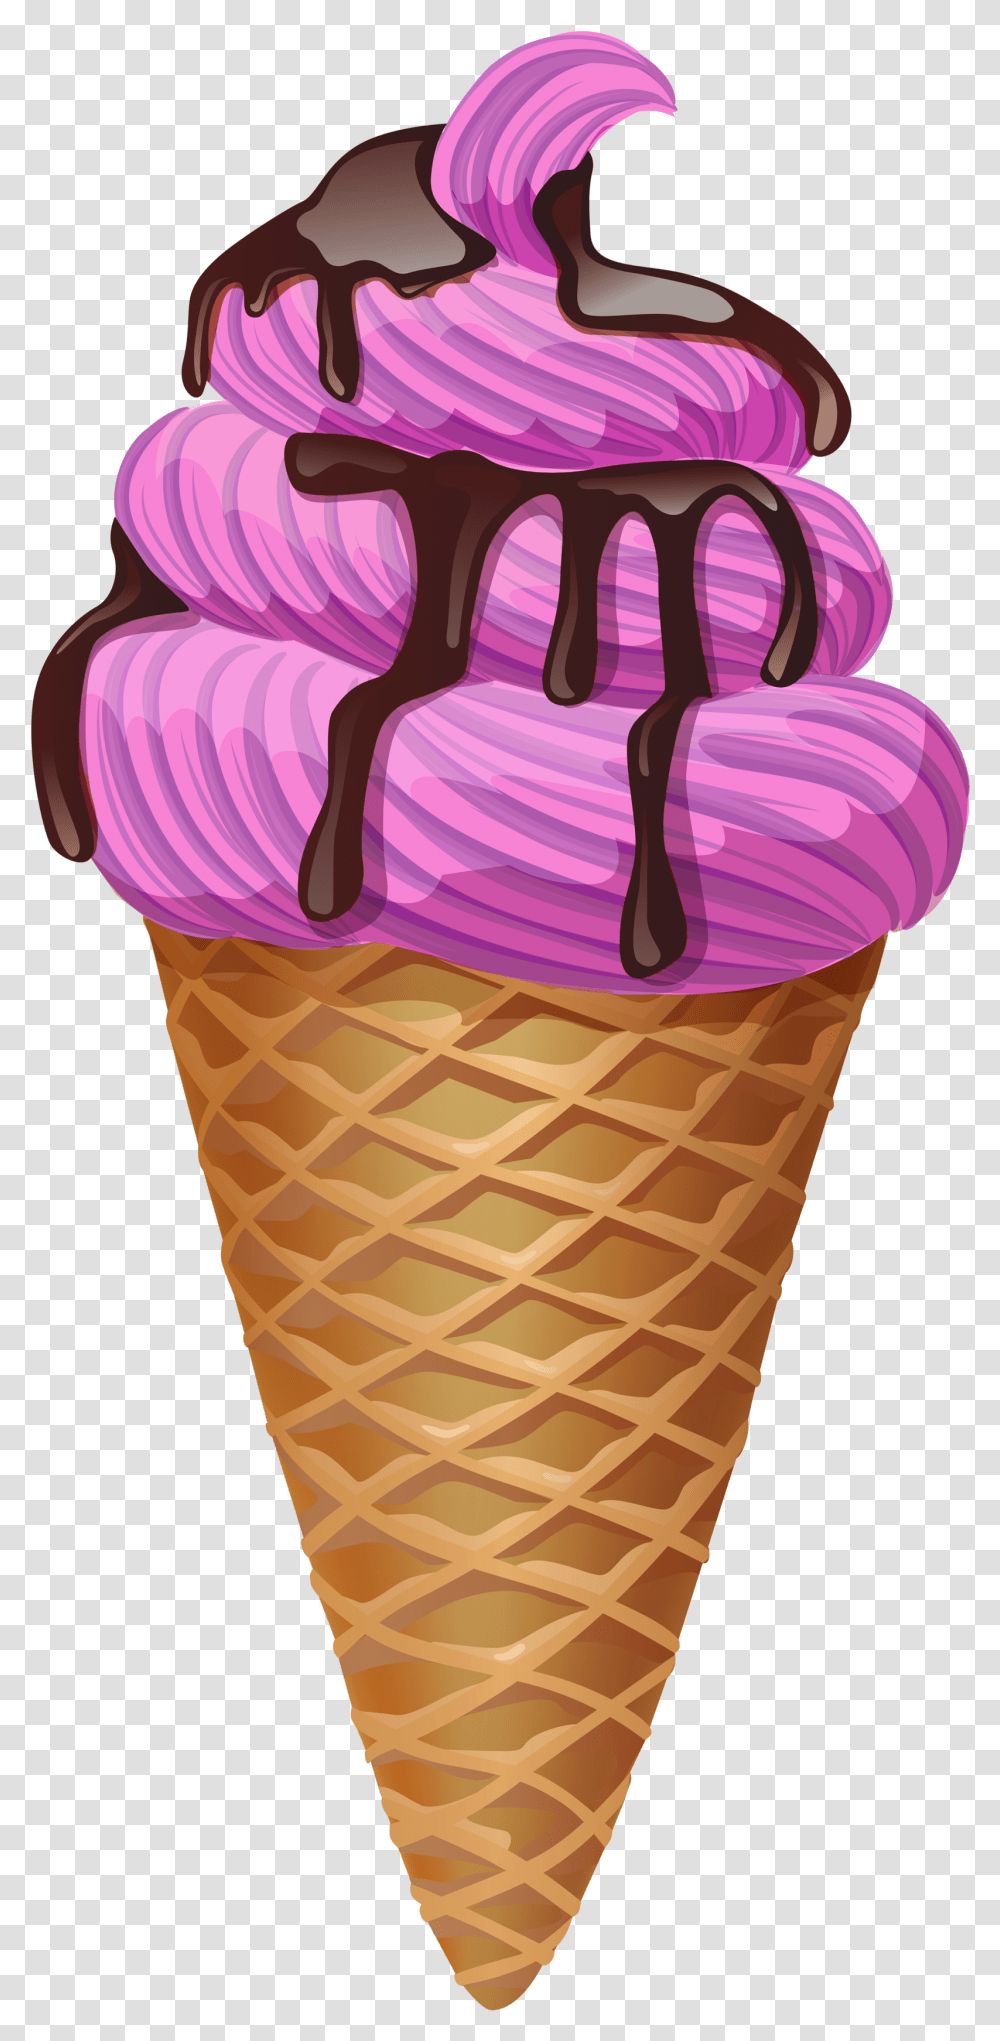 Ice Cream Cone Background Clipart Collection Clip Art Ice Cream, Dessert, Food, Creme, Sweets Transparent Png